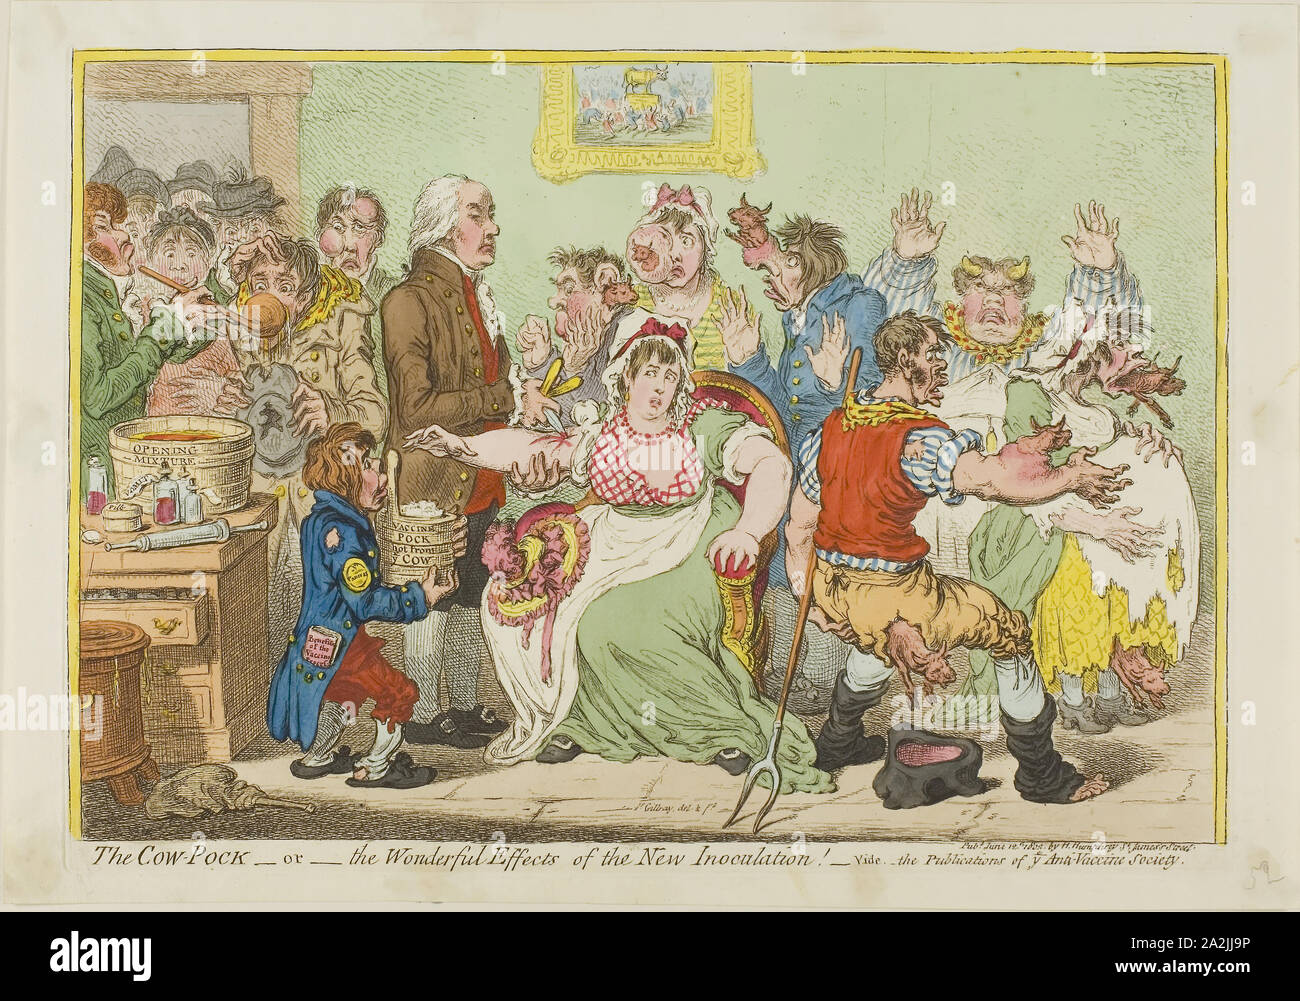 The Cow-Pock- or- The Wonderful Effects of the New Innoculation!, June 12, 1802, James Gillray (English, 1756-1815), published by Hannah Humphrey (English, c. 1745-1818), England, Etching with hand-coloring on cream wove paper, 234 × 338 mm (image), 252 × 347 mm (plate), 270 × 387 mm (sheet Stock Photo